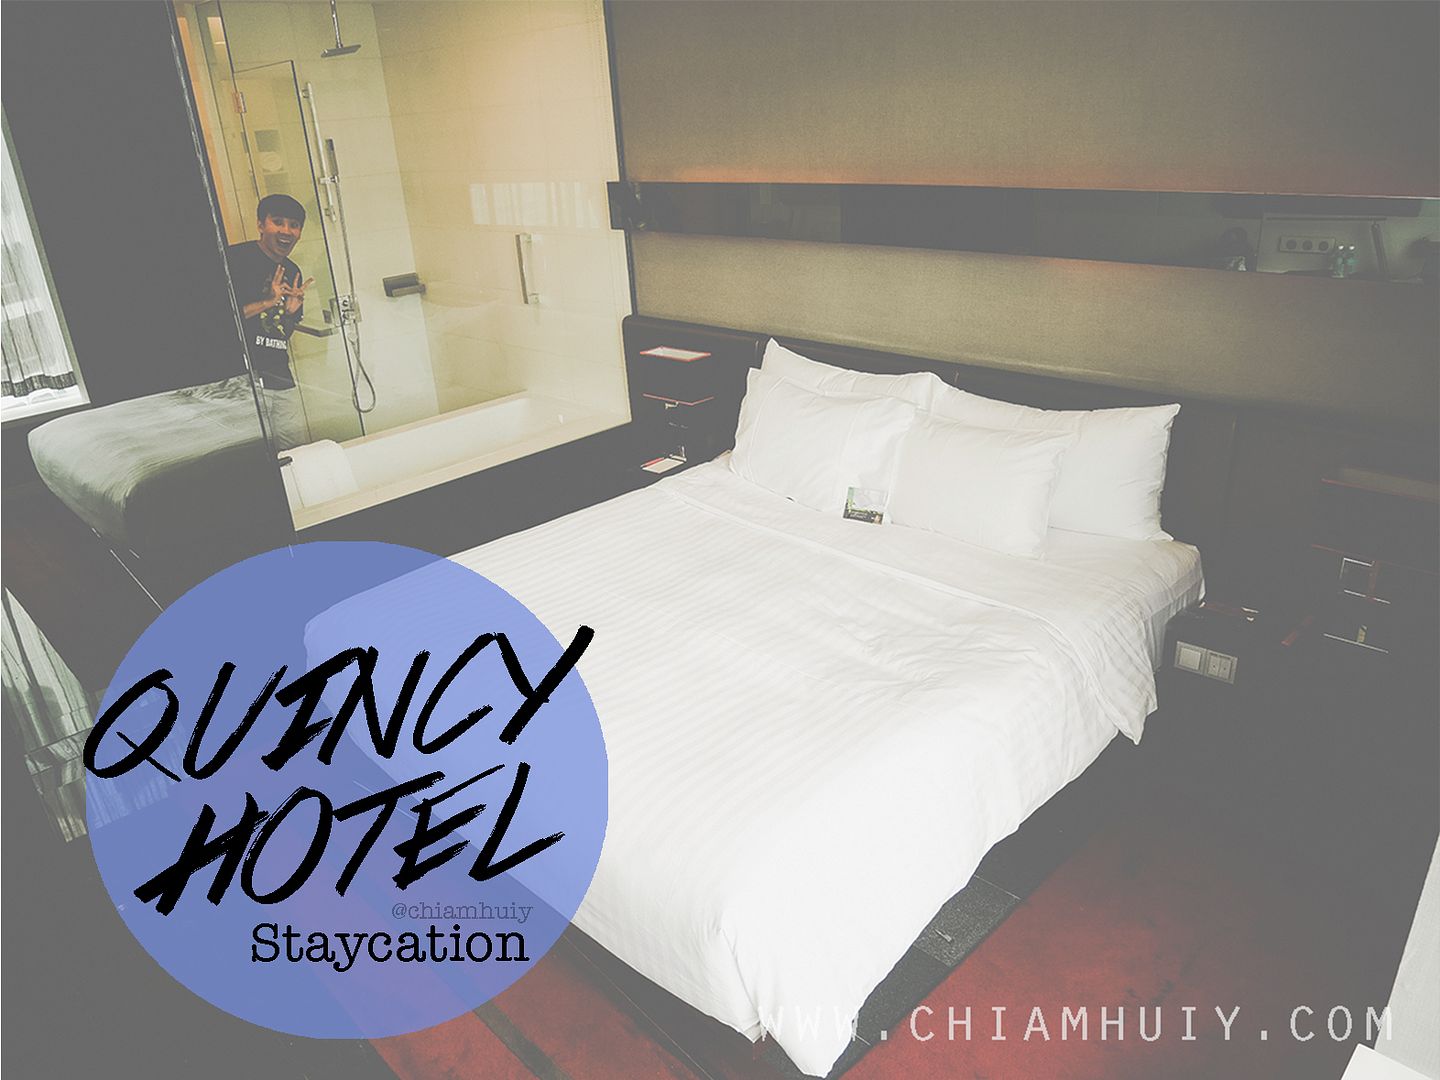 quincy%20hotel%20staycation